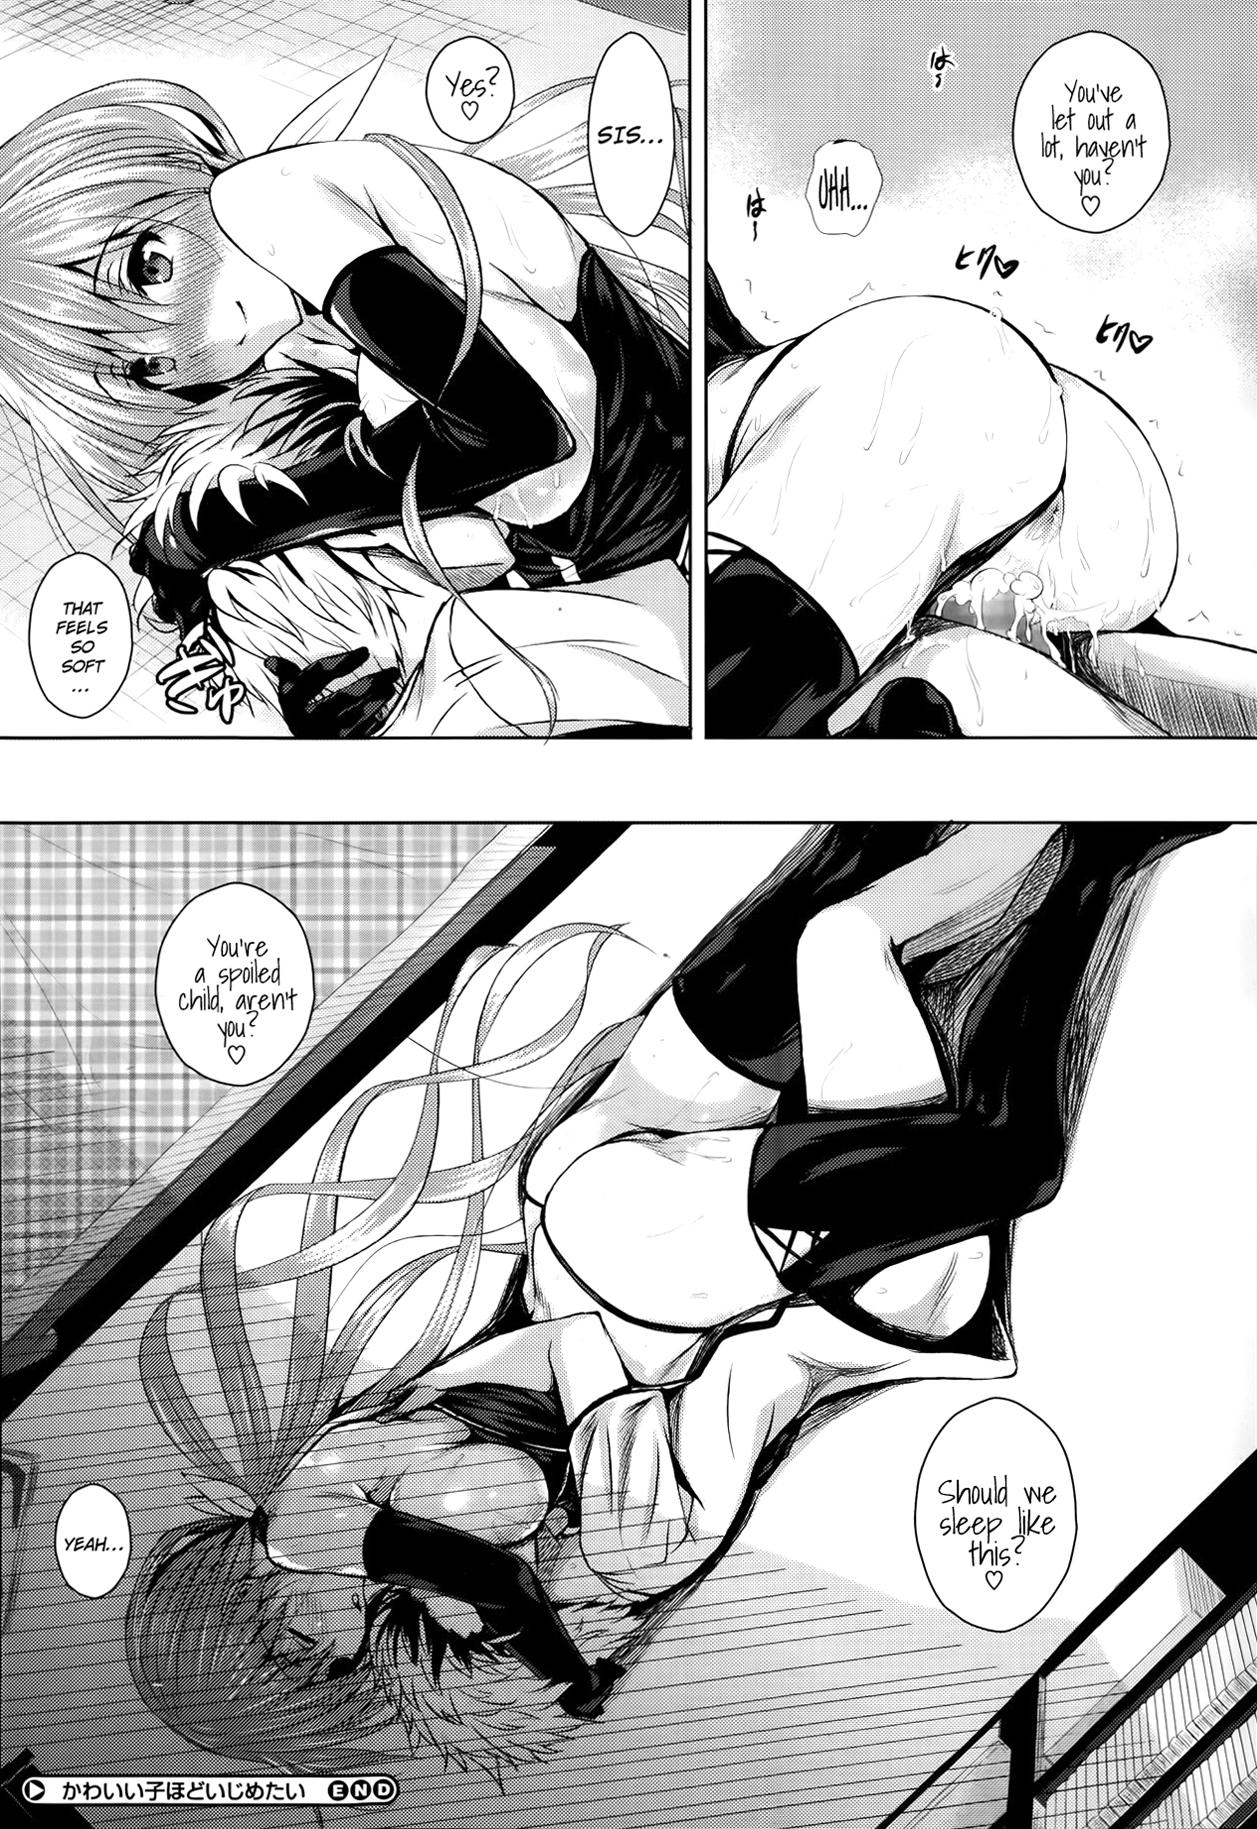 Underwear Kawaii Ko Hodo Ijimetai | The Cuter He Is, The More I Want To Tease Him Facefuck - Page 20